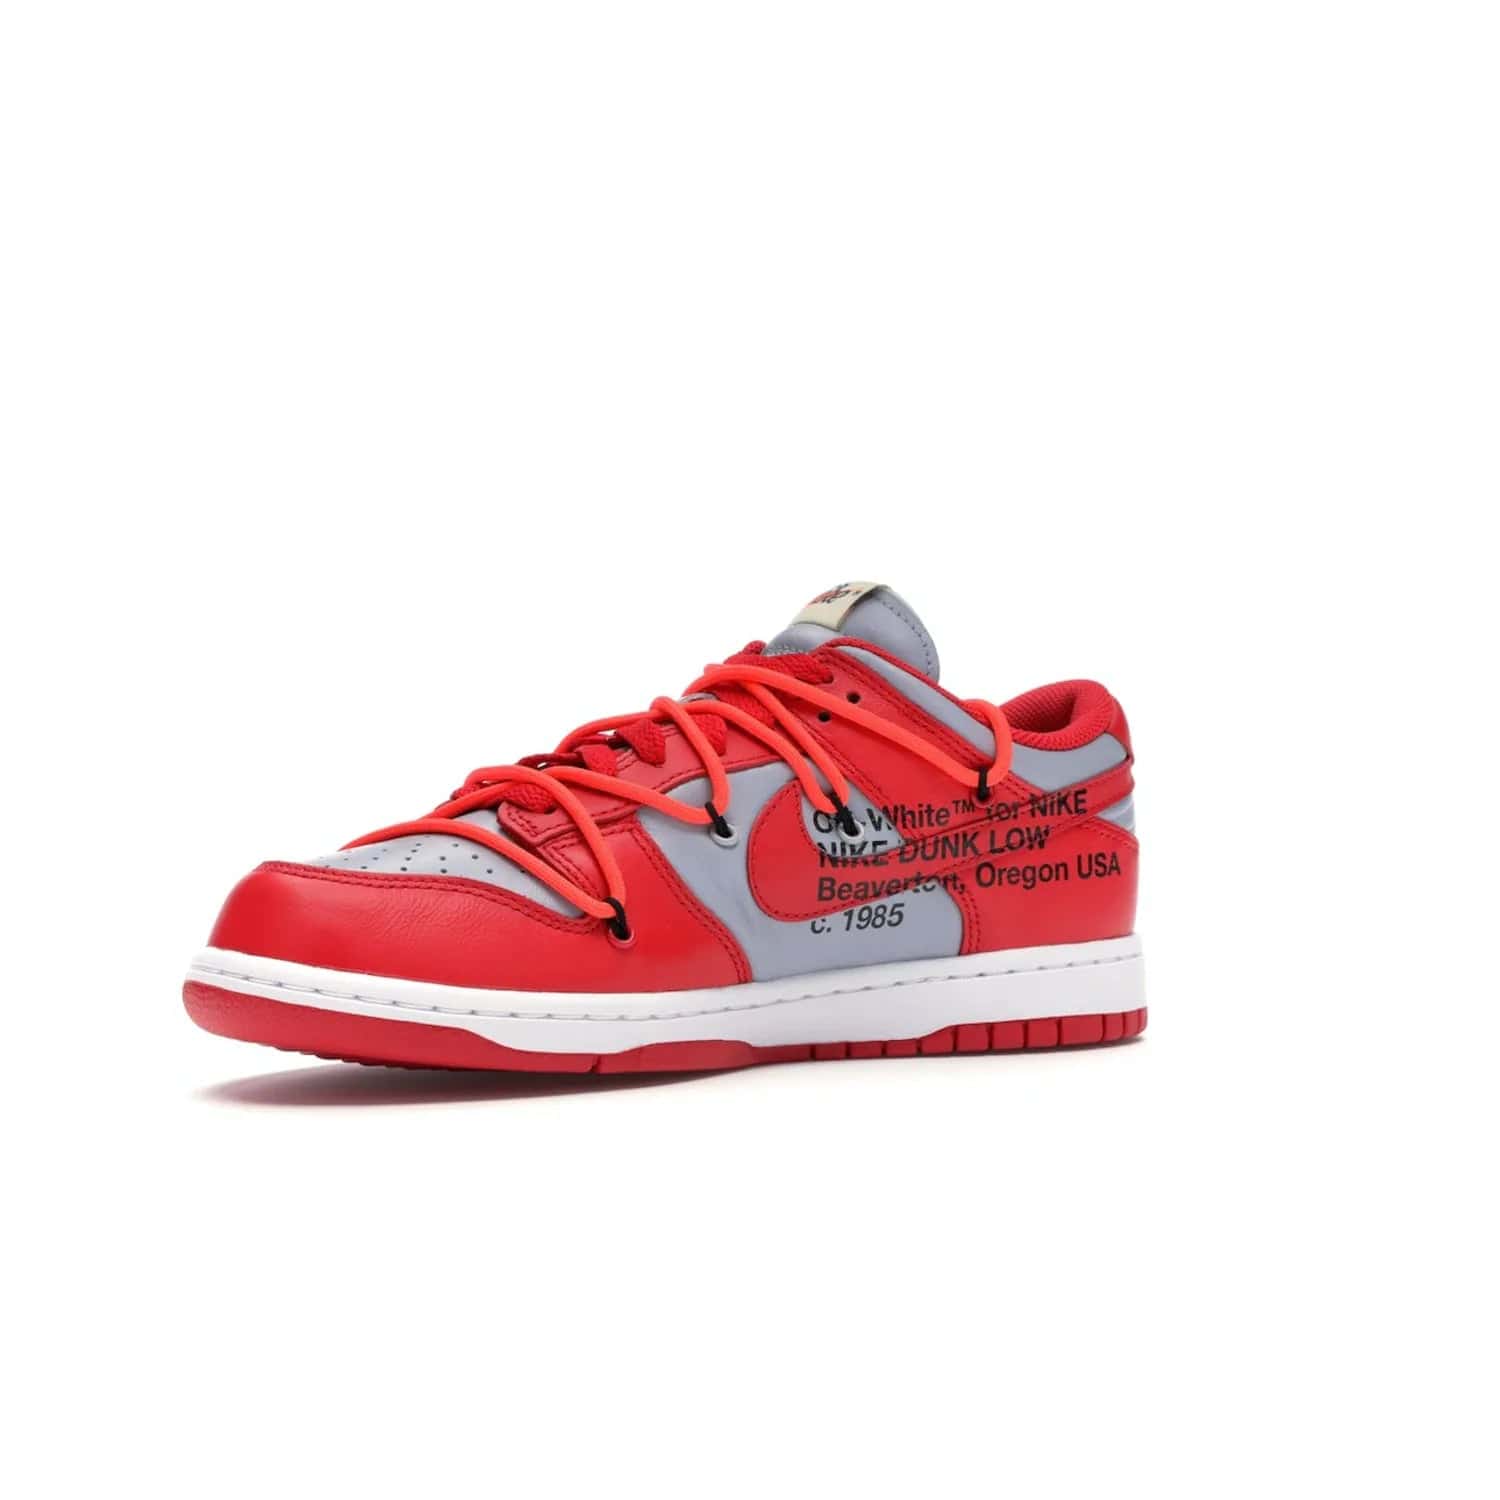 Nike Dunk Low Off-White University Red - Image 16 - Only at www.BallersClubKickz.com - The Nike Dunk Low Off-White University Red offers tribute to classic Nike Basketball silhouettes. Features include wolf grey leather, university red overlays, zip-ties, and Off-White text. Perfect for any sneaker fan, these stylish sneakers released in December of 2019.